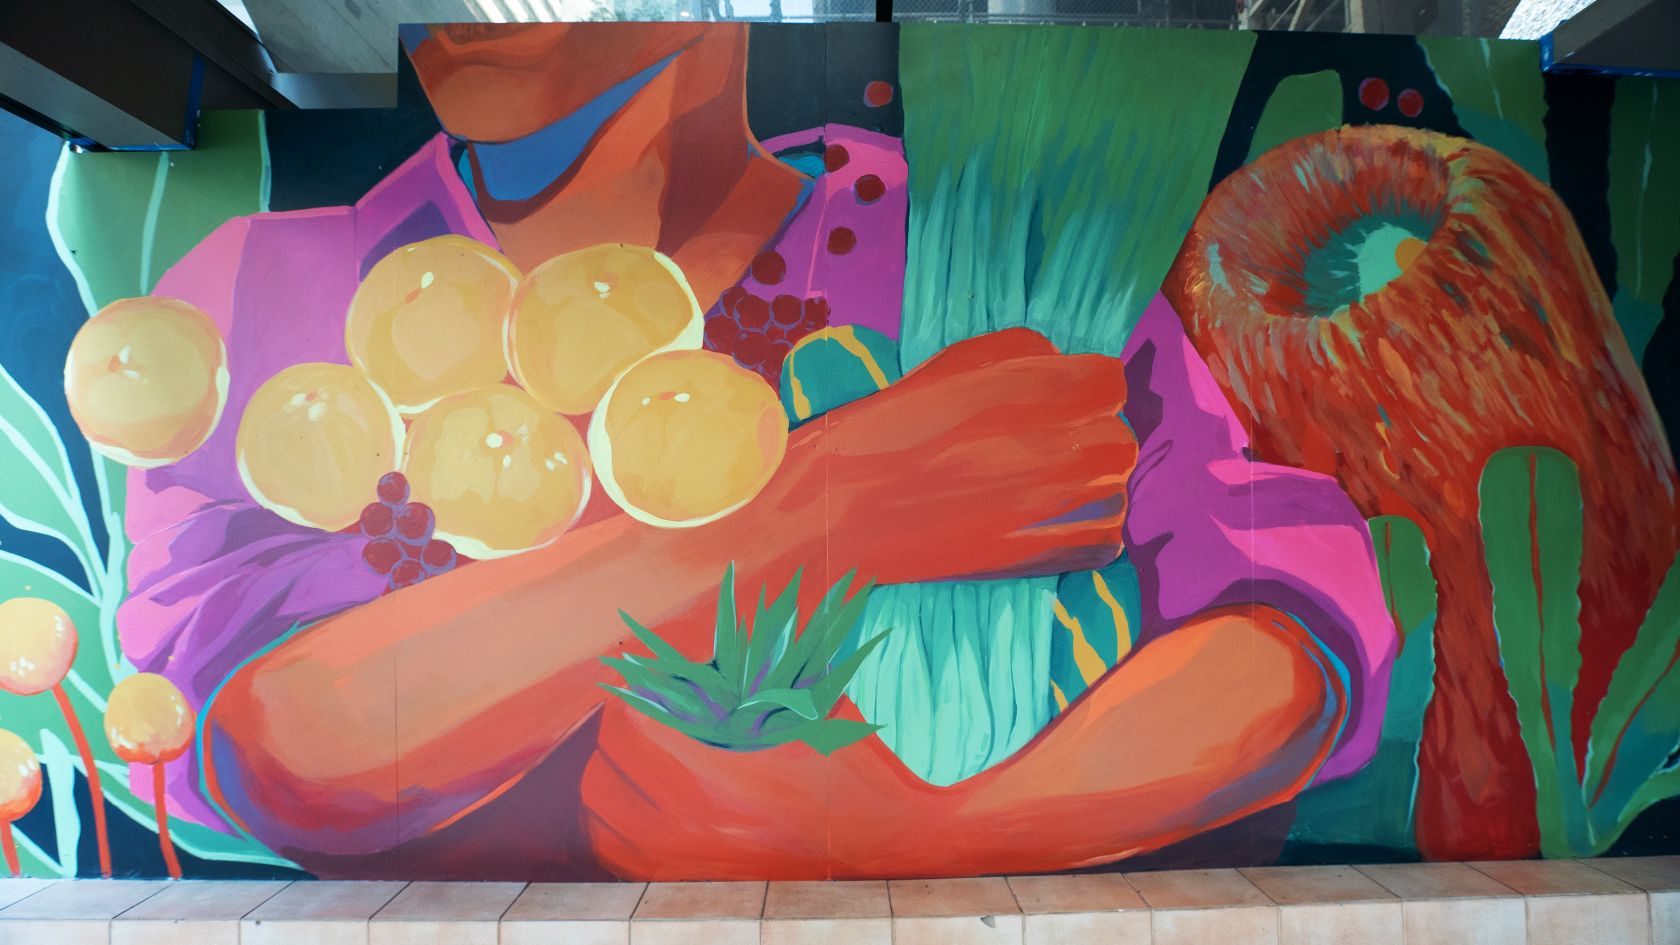 Local artist hoarding project comes to life at Heritage Lanes